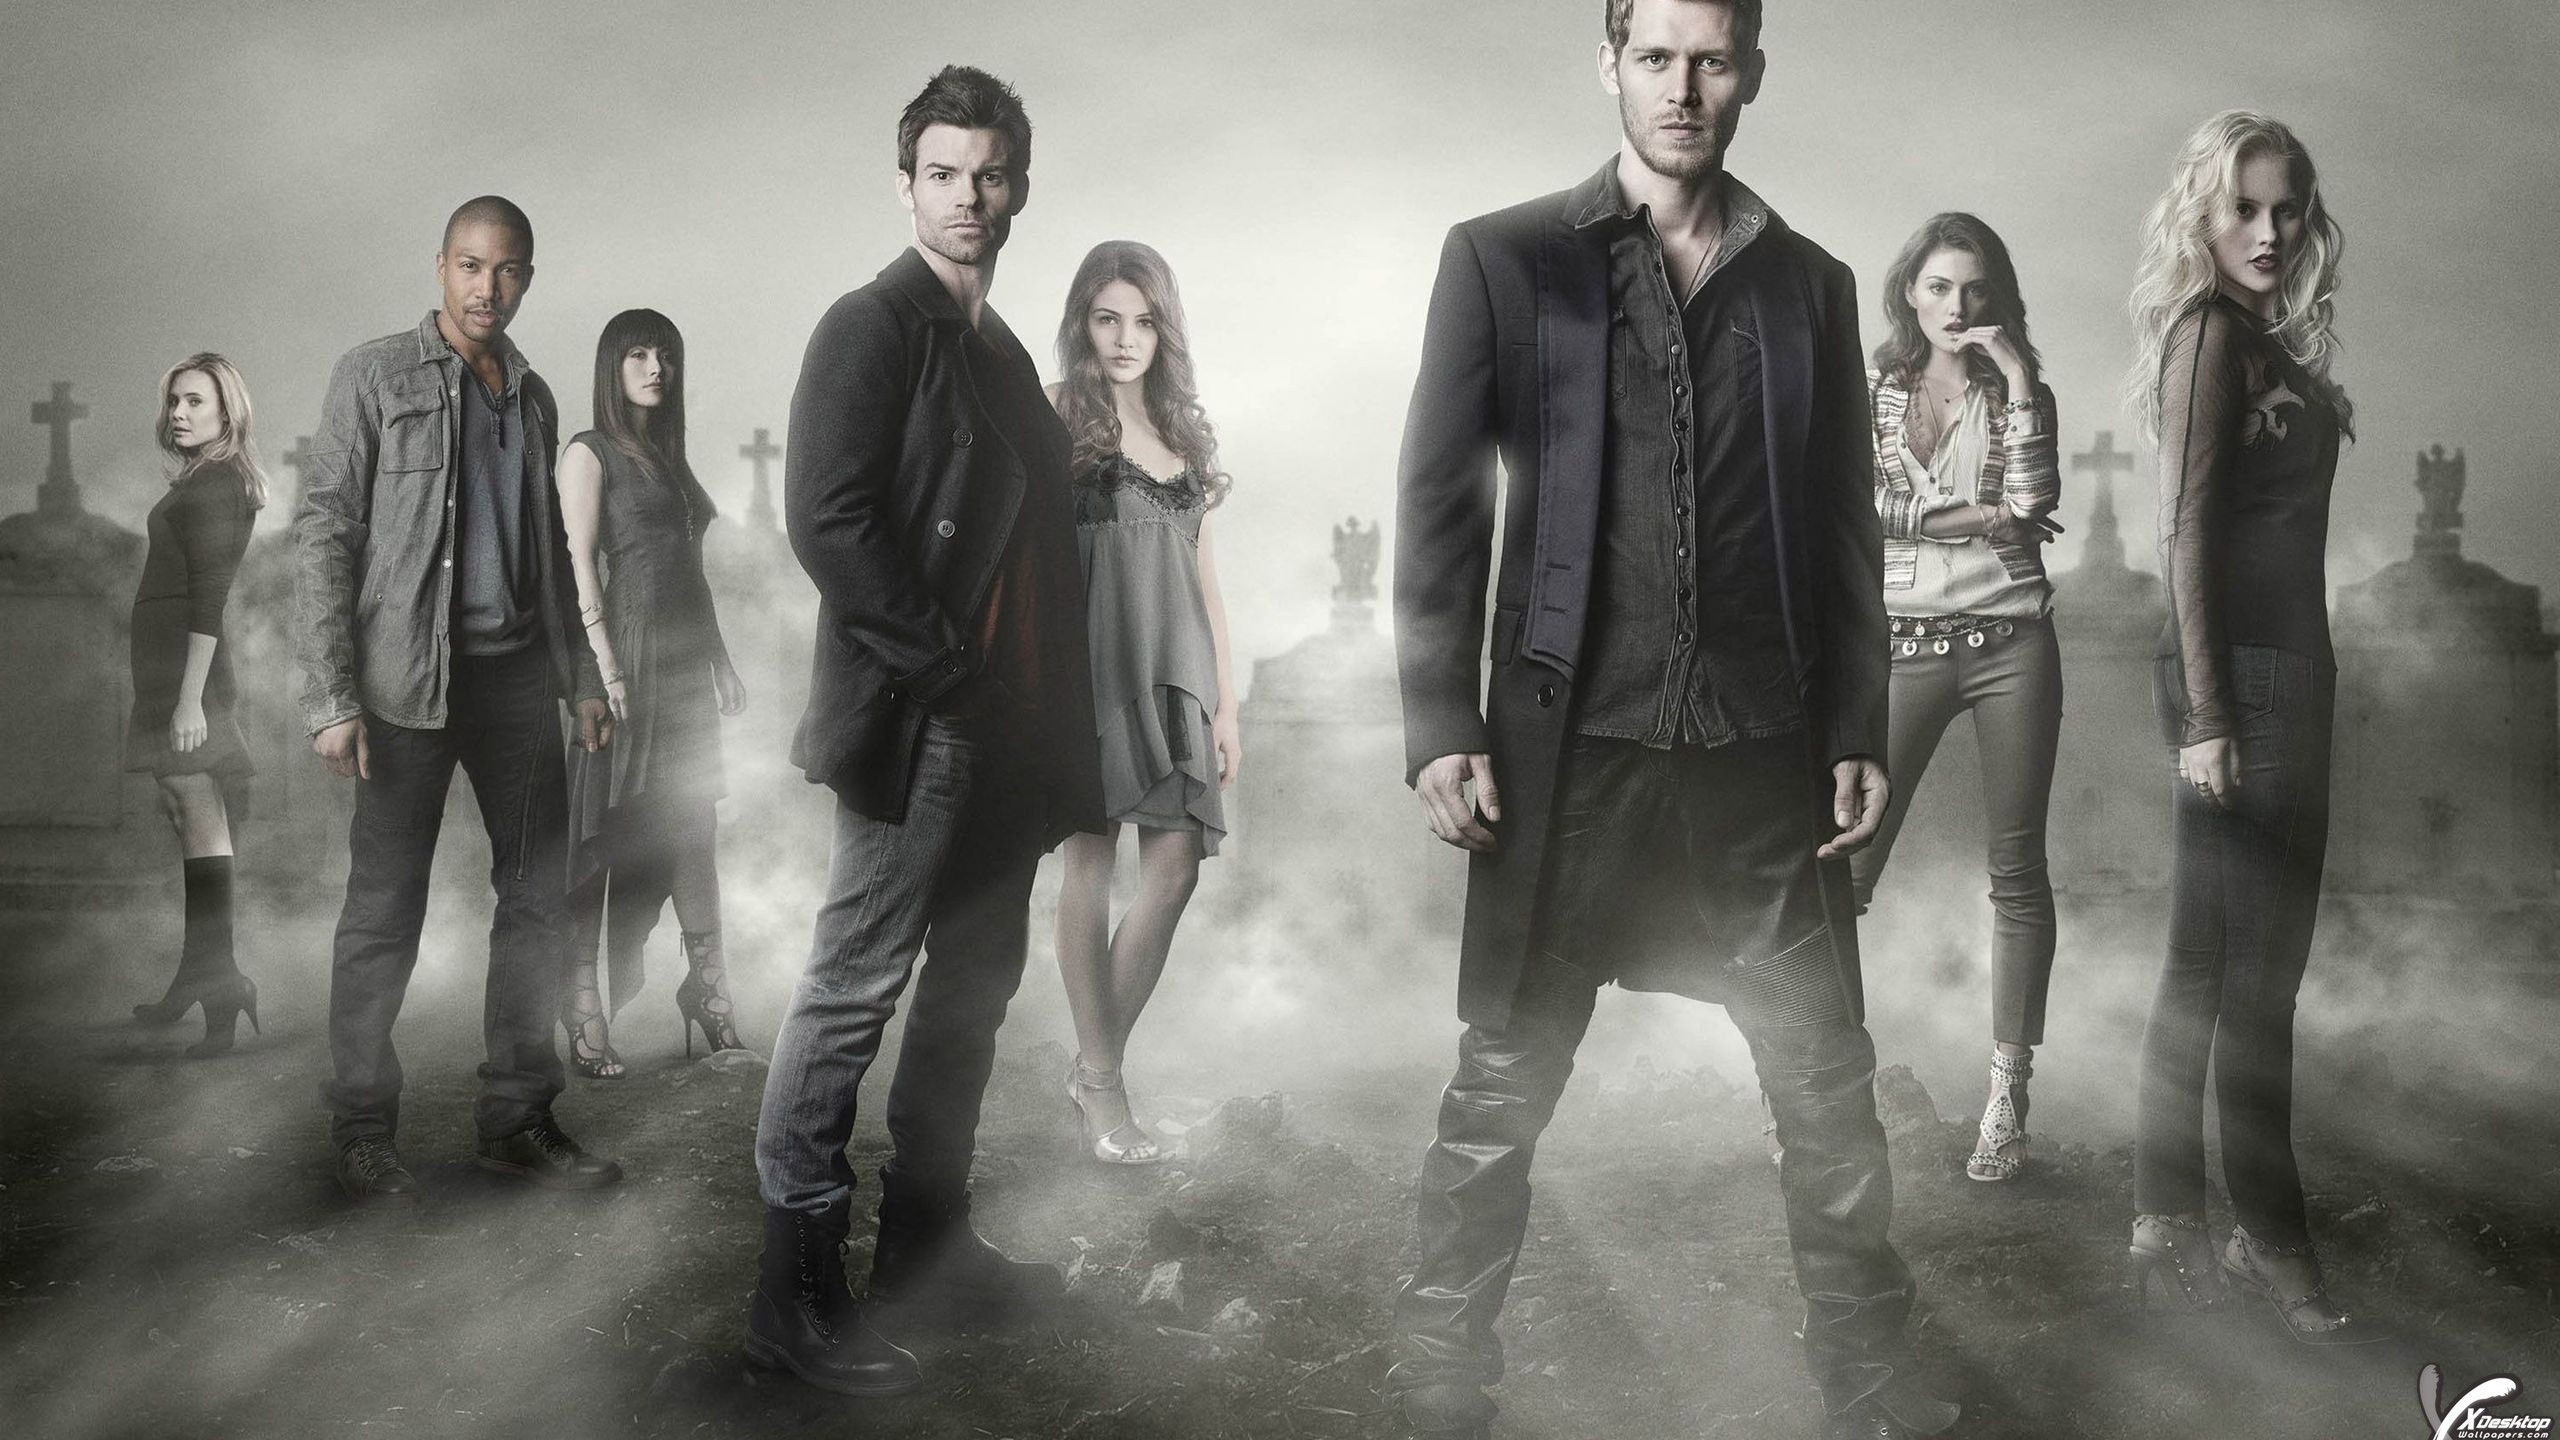 All Characters Of The Originals Standing On A Foggy Place Wallpaper